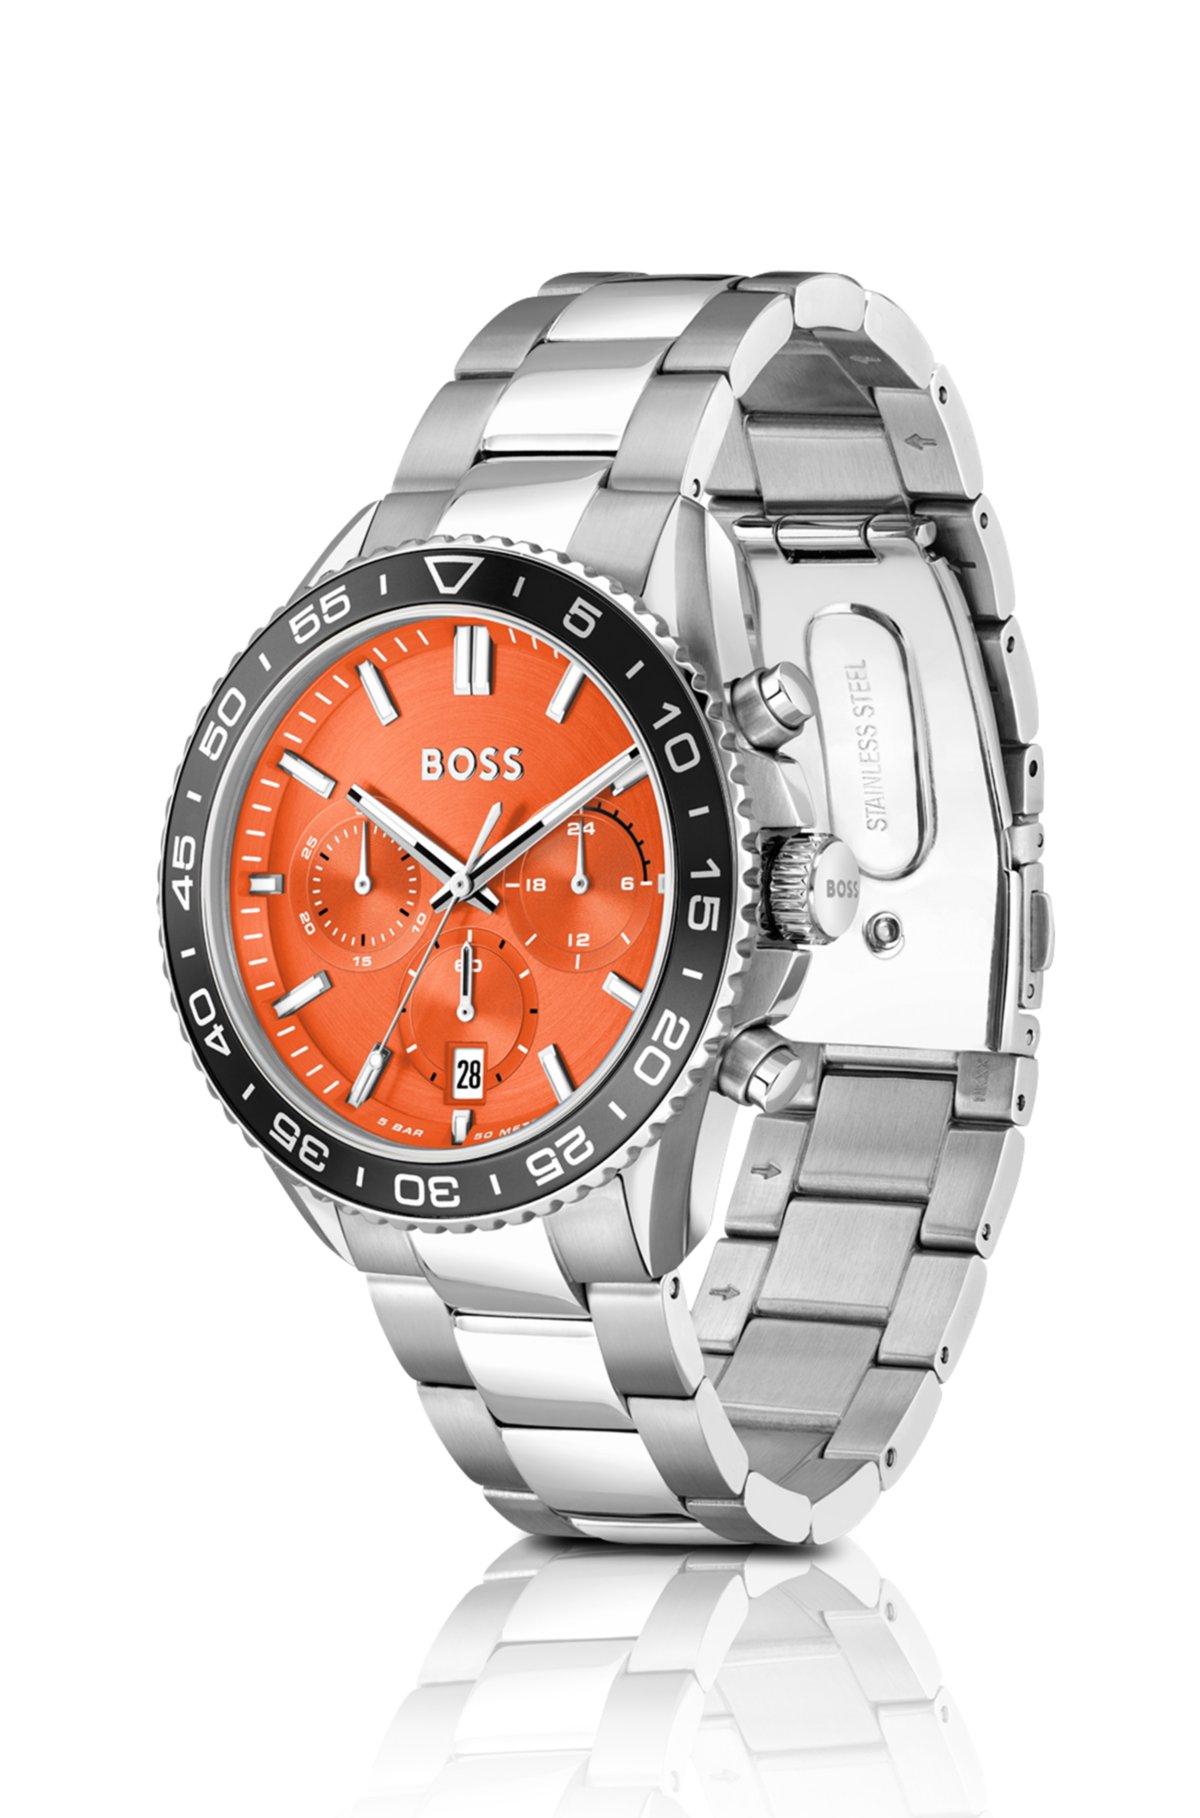 Link bracelet chronograph watch with orange dial, Silver